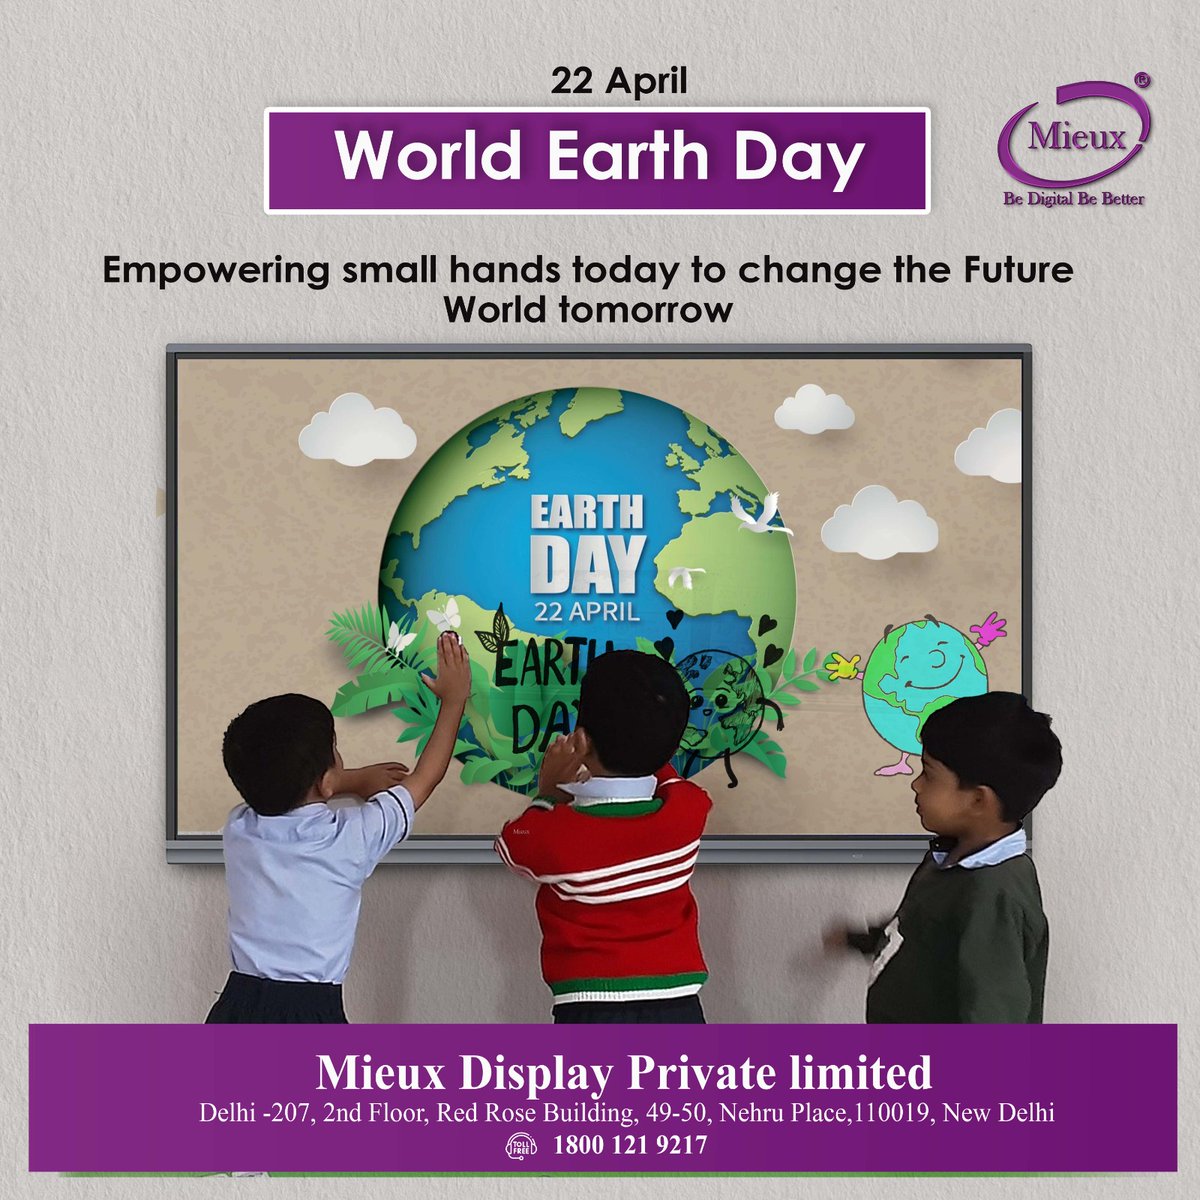 Empowering Young Minds, Shaping a Brighter Future: Celebrate World Education Day with Mieux Education Flat Panels!
Choose Mieux Education IFP to empower your students to reach their full potential.

#WorldEducationDay #MieuxEducation #EmpoweringStudents #BuildingTheFuture